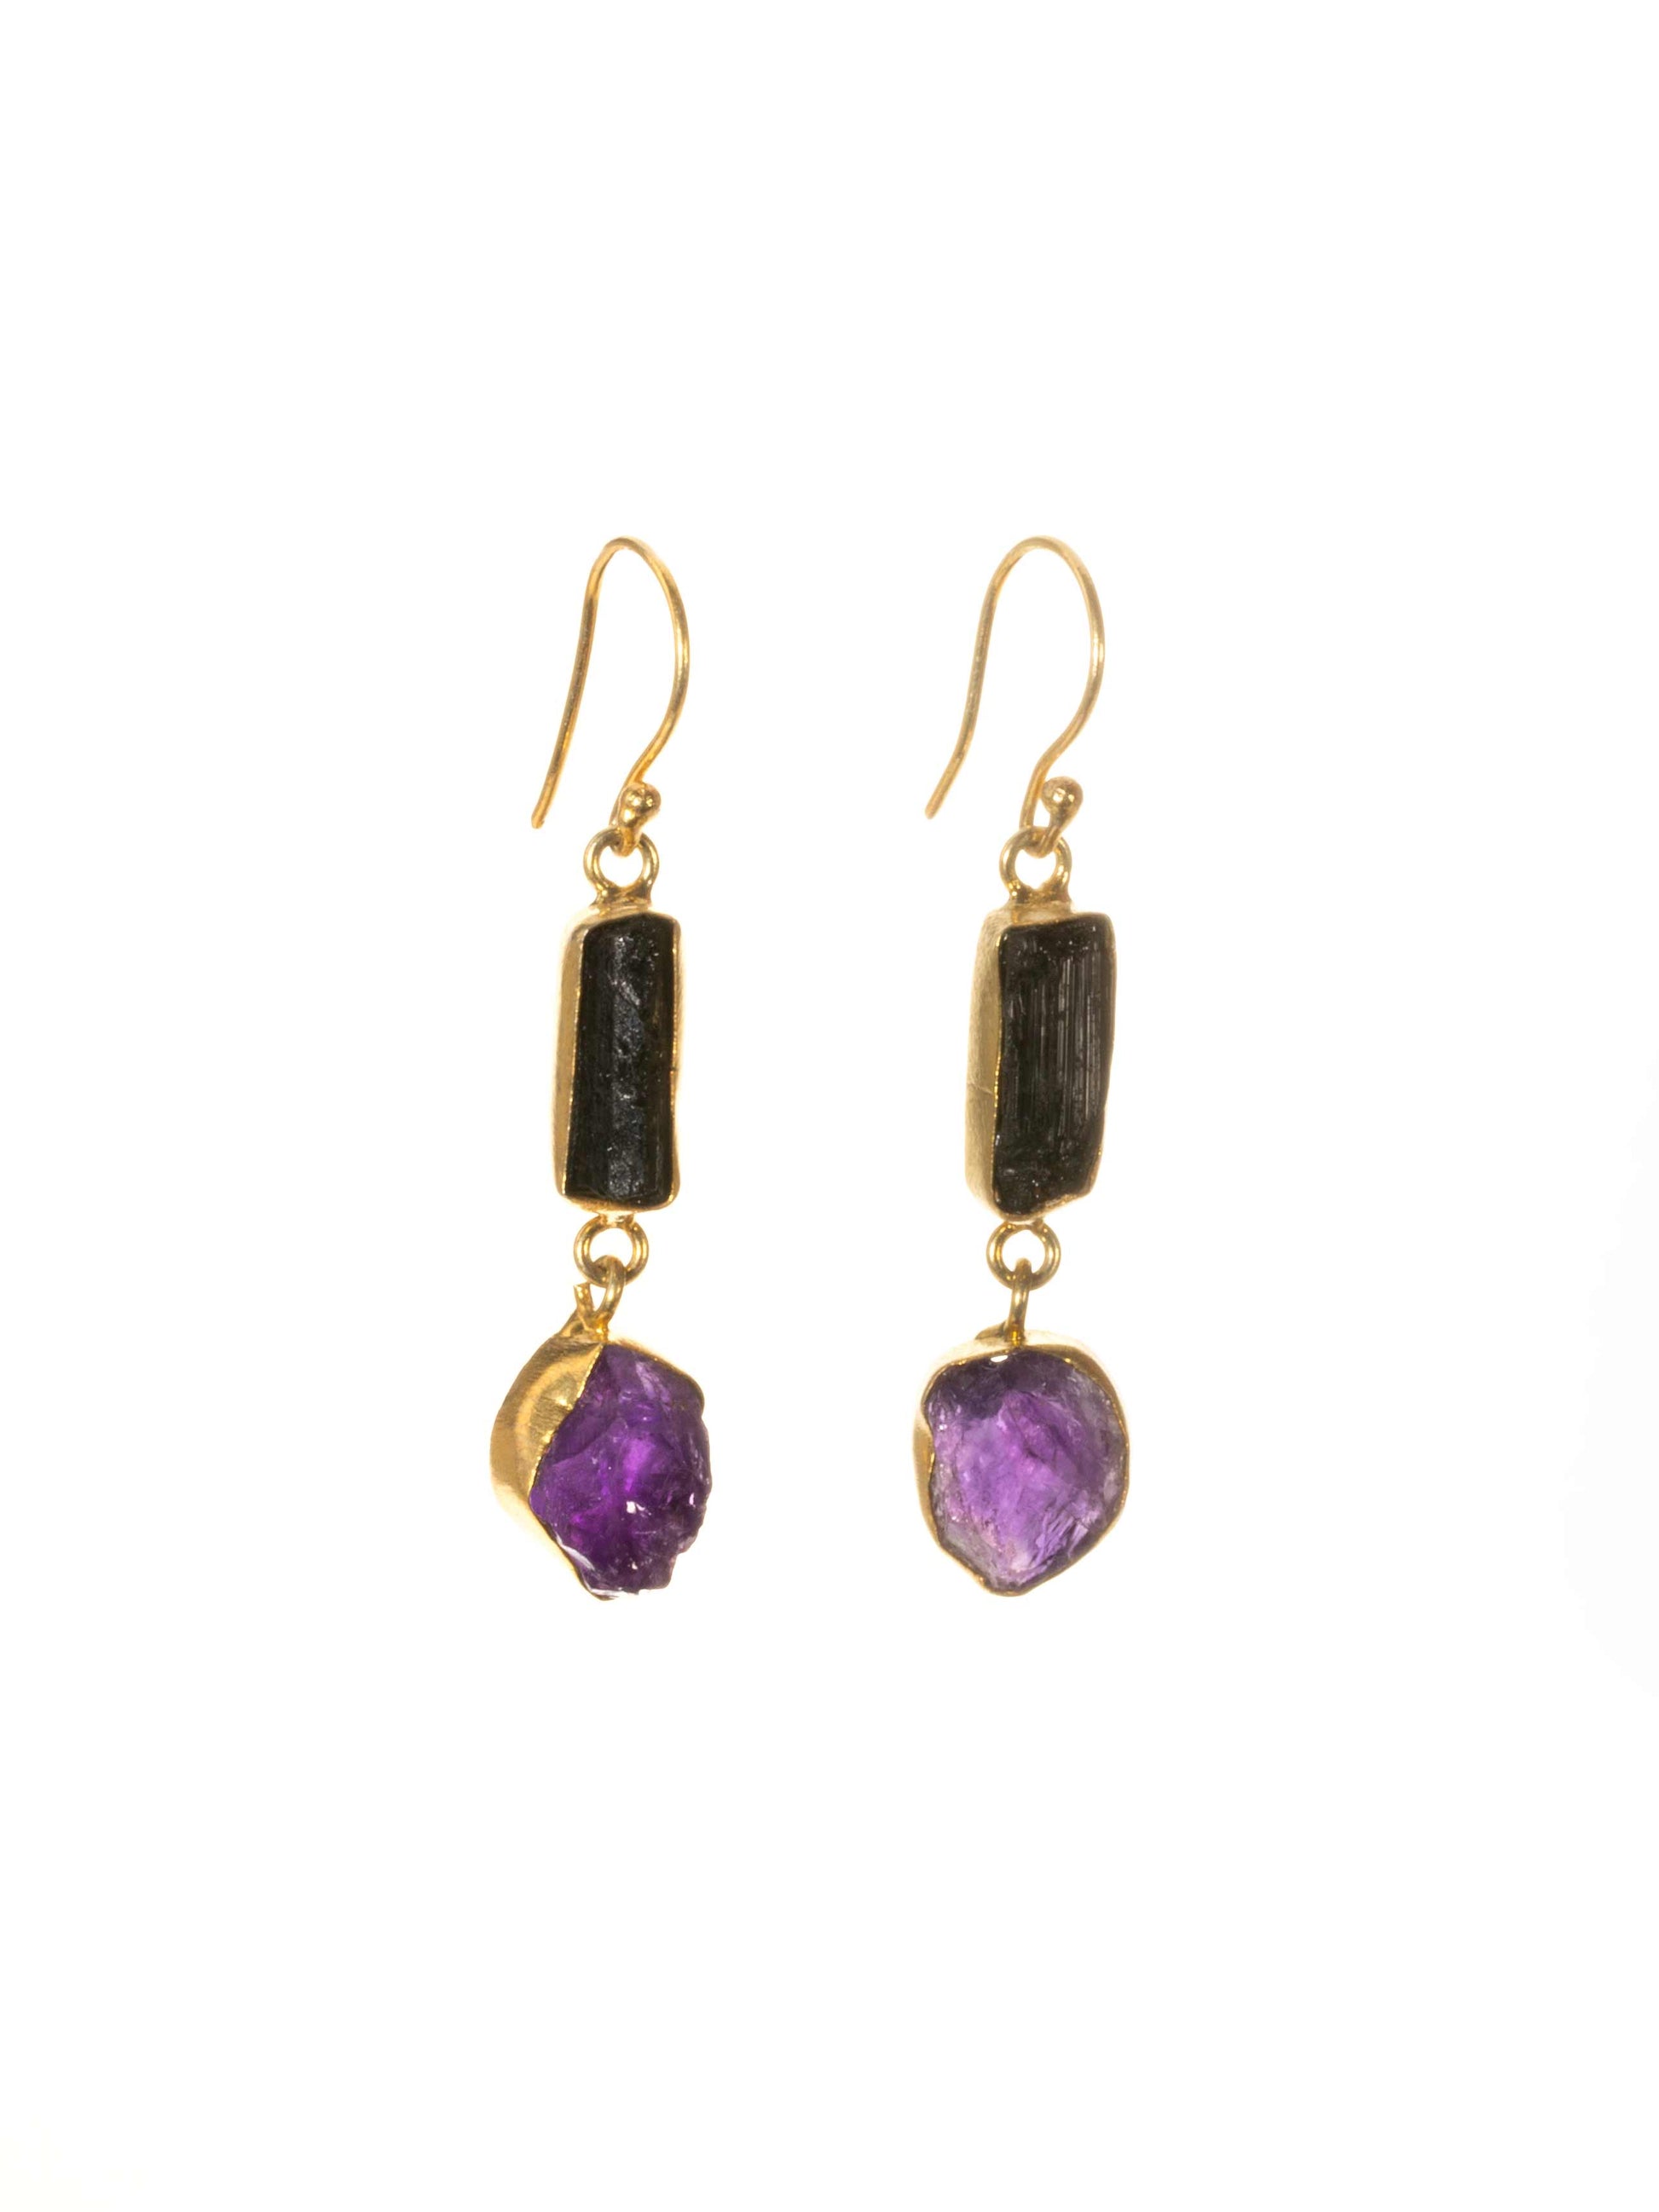 Gold Luxe earrings -black tourmaline and amethyst drop dangles